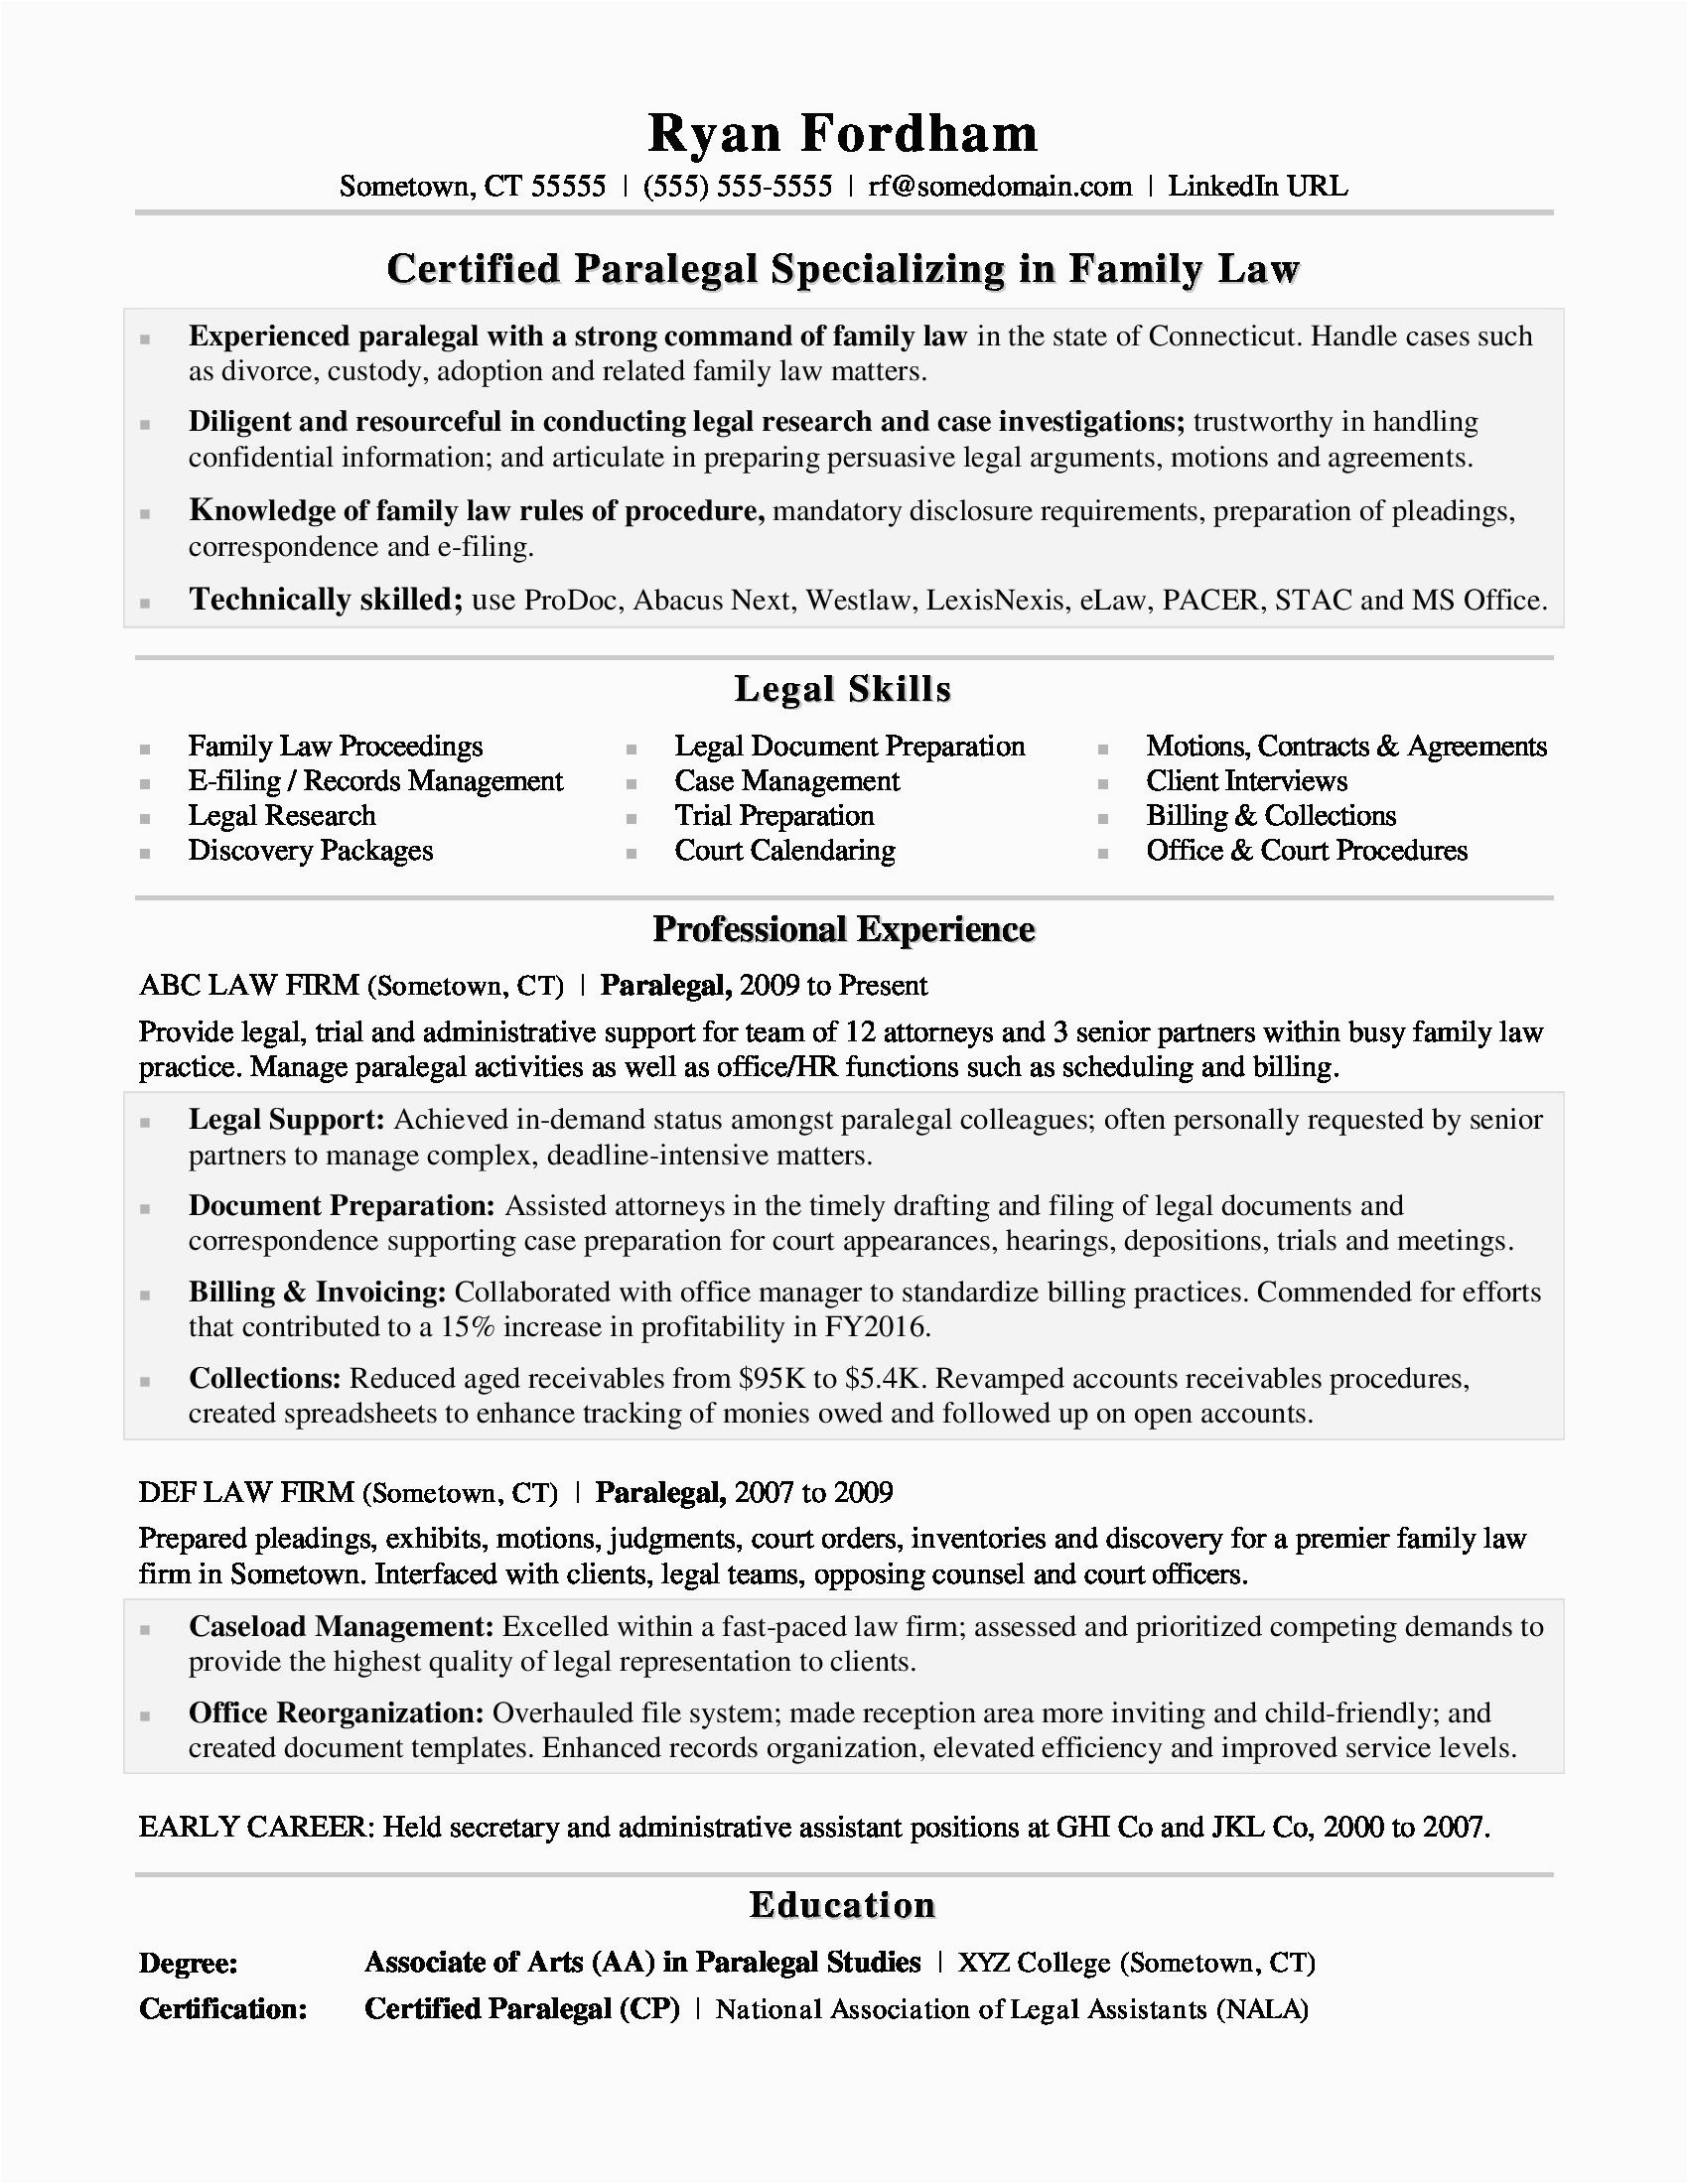 Sample Of Entry Level Paralegal Resume Entry Level Paralegal Resume Mryn ism